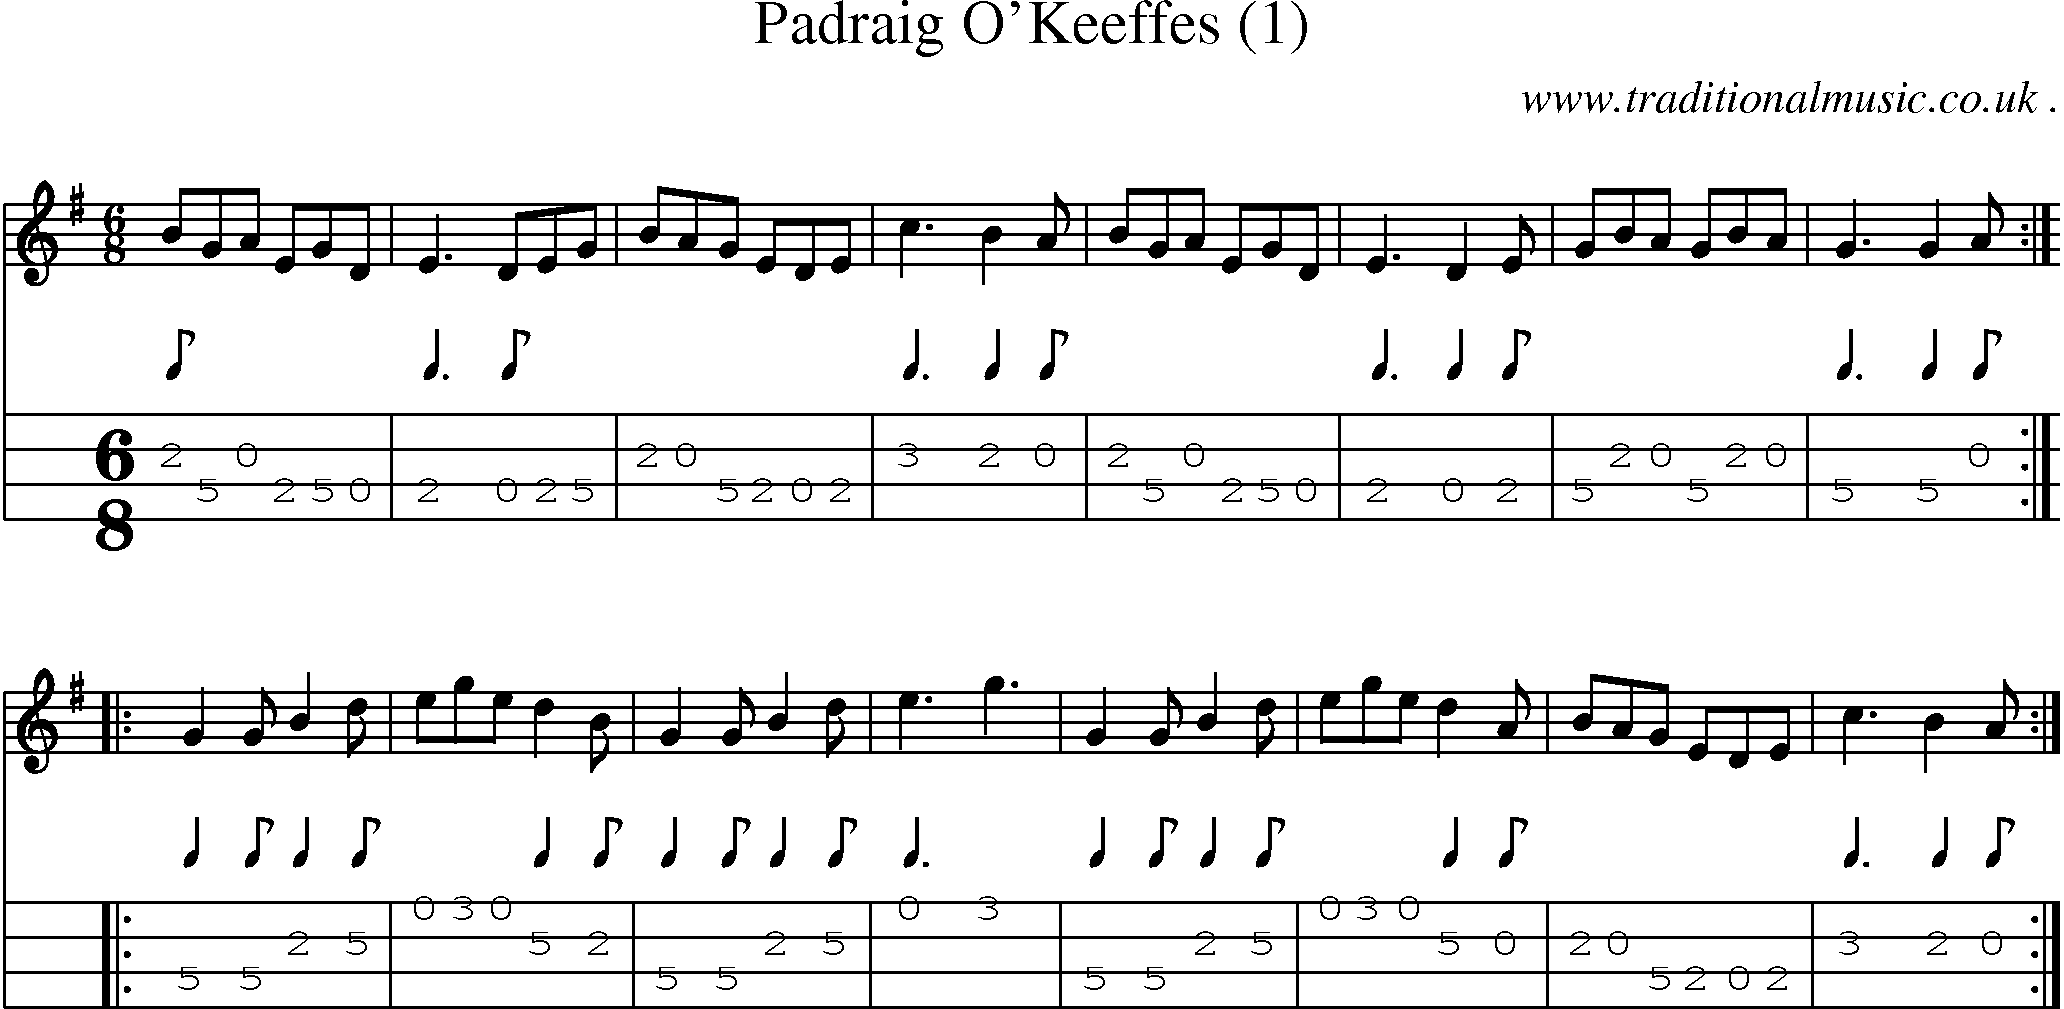 Sheet-Music and Mandolin Tabs for Padraig Okeeffes (1)